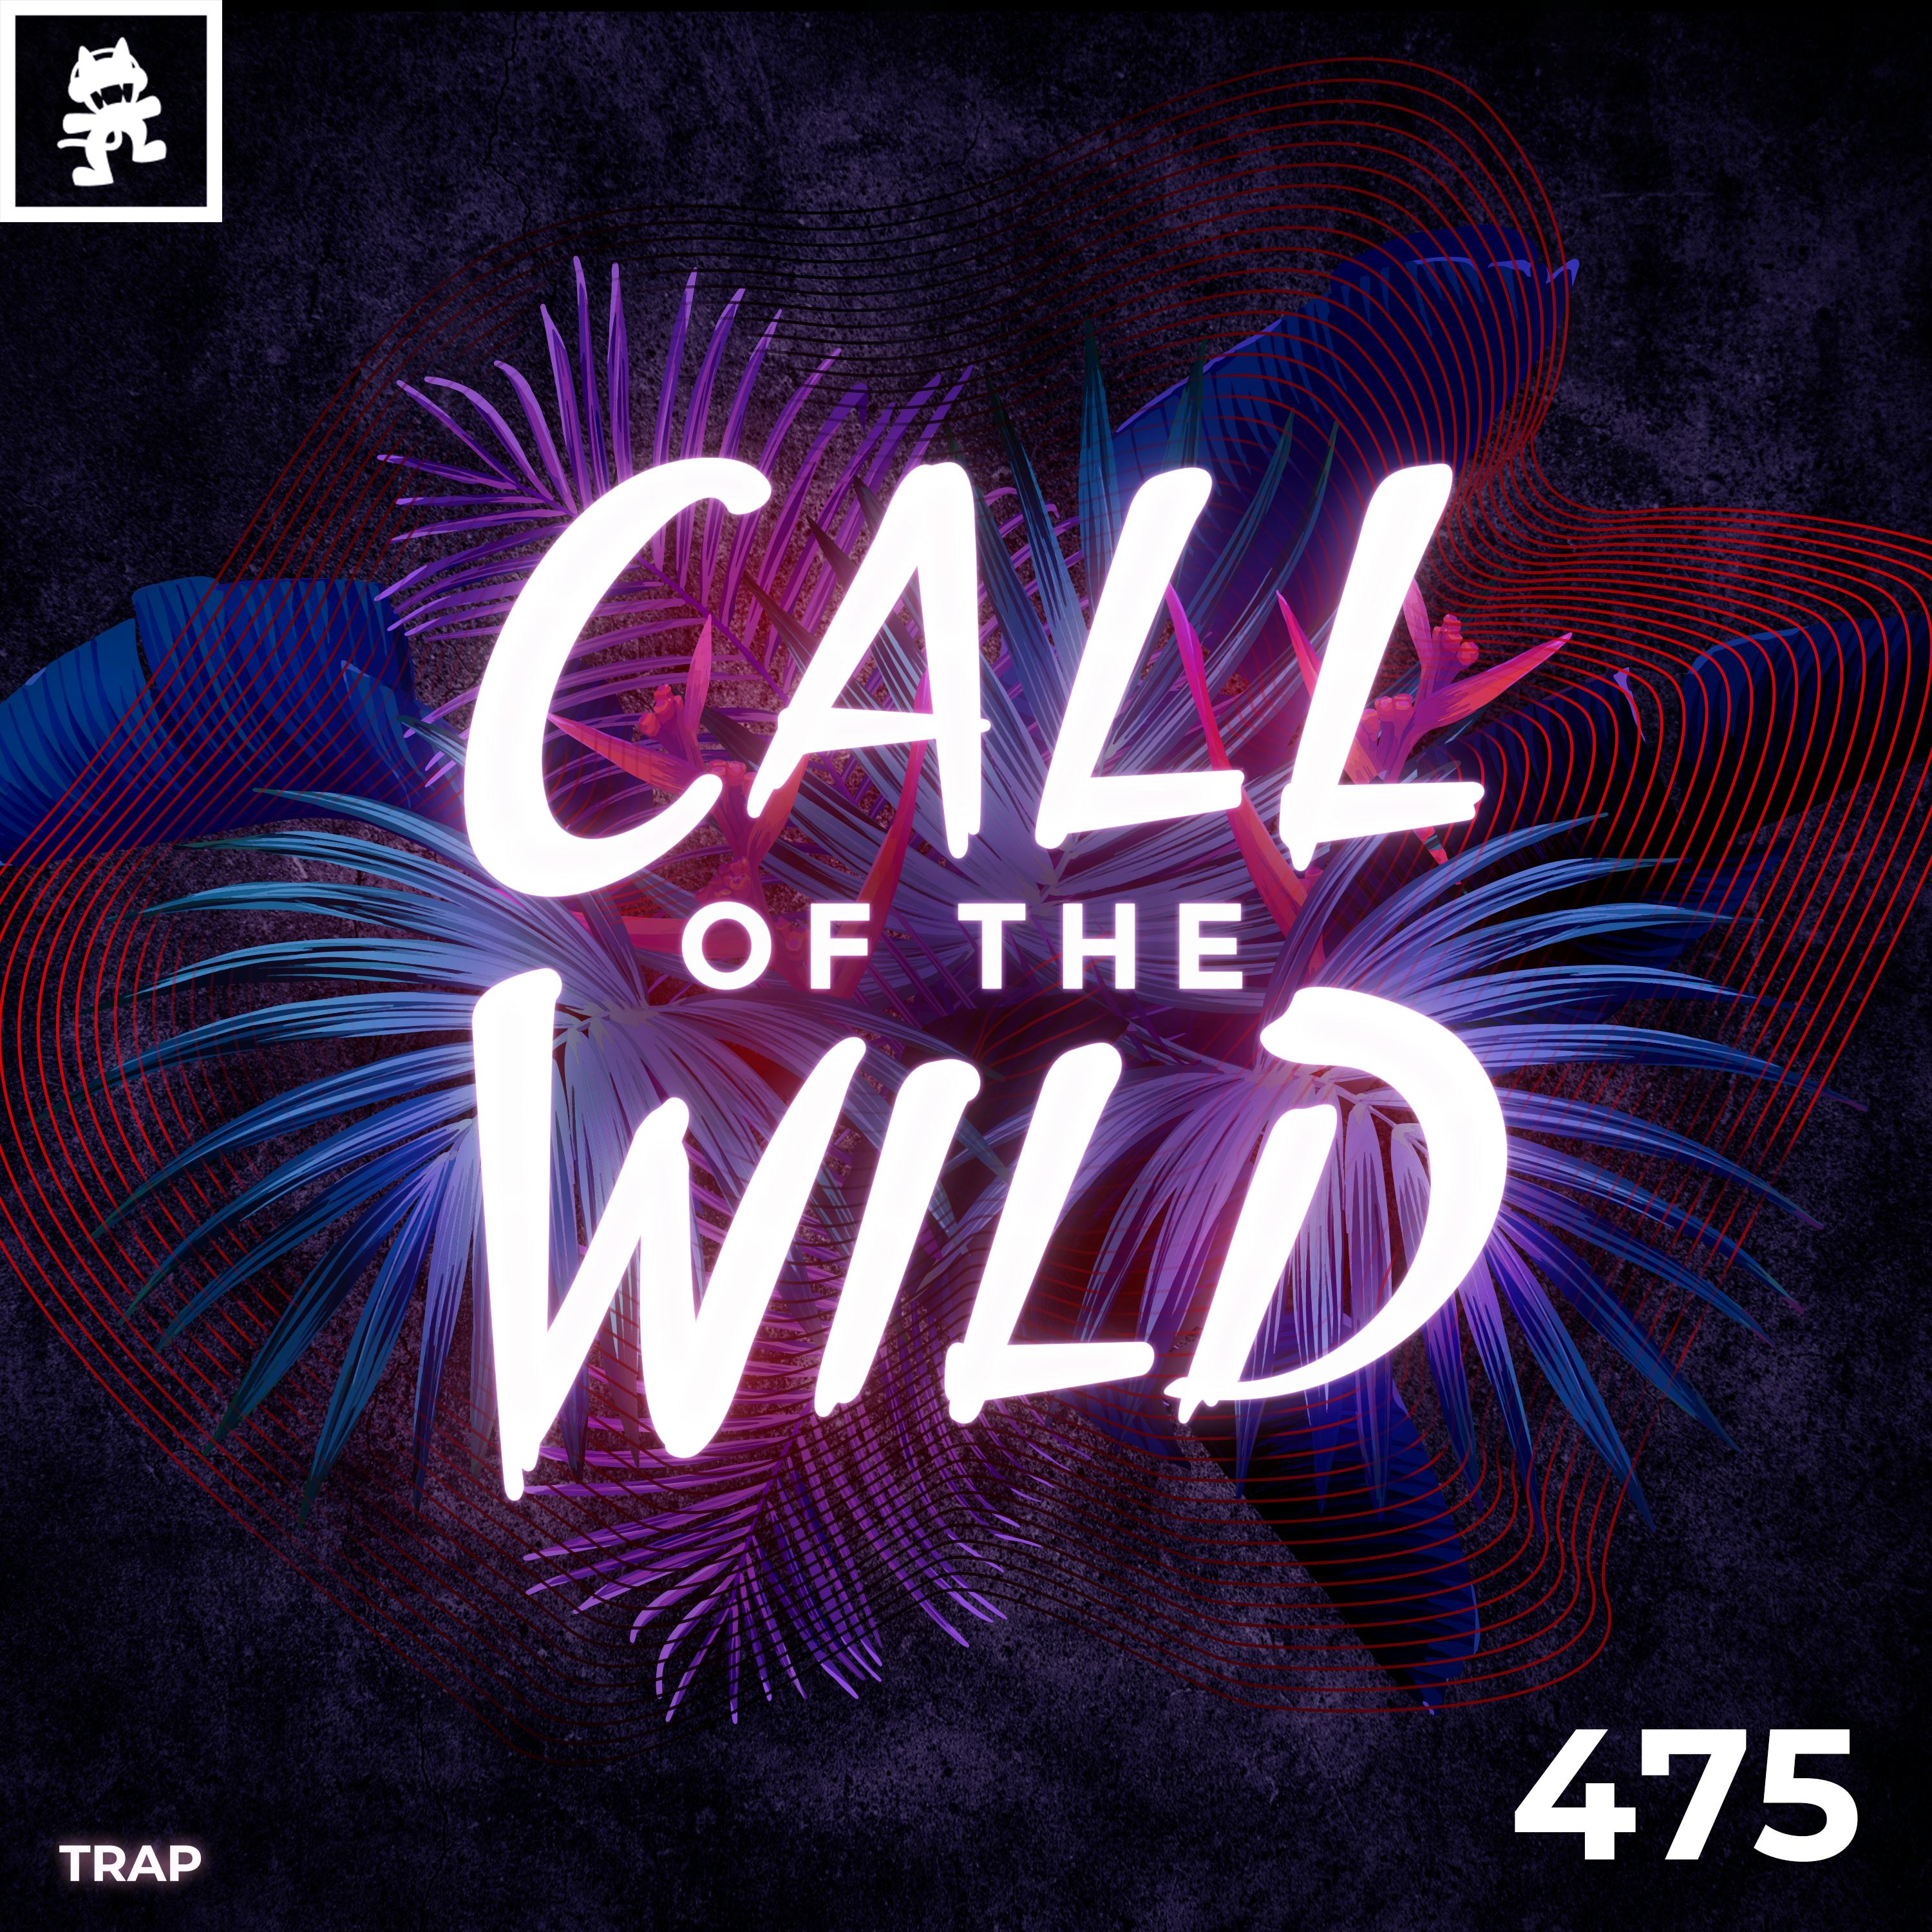 475 - Monstercat Call of the Wild: Trap